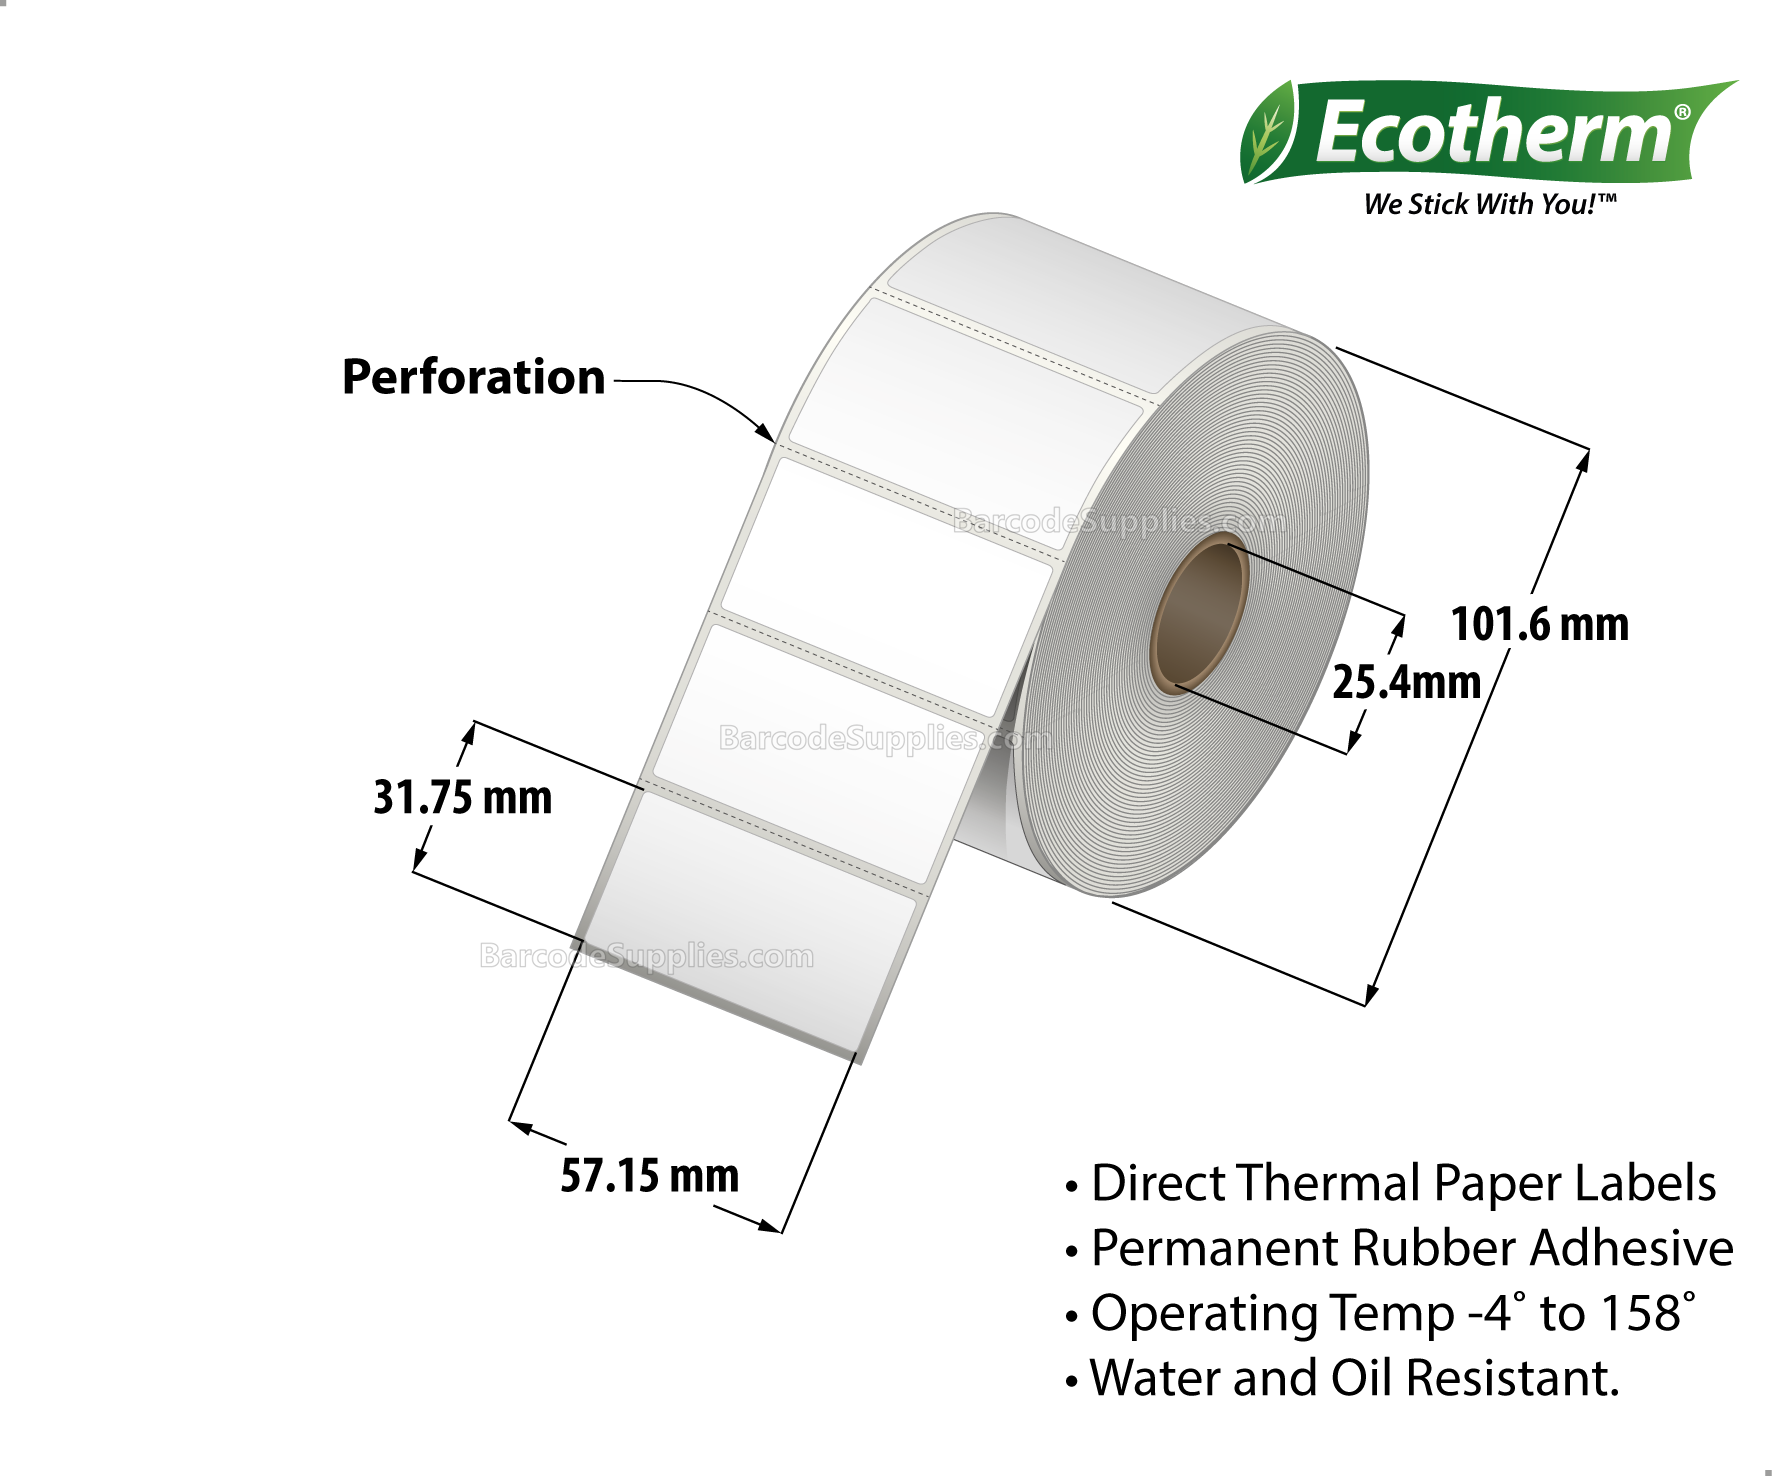 2.25 x 1.25 Direct Thermal White Labels With Rubber Adhesive - Perforated - 1135 Labels Per Roll - Carton Of 4 Rolls - 4540 Labels Total - MPN: ECOTHERM14103-4